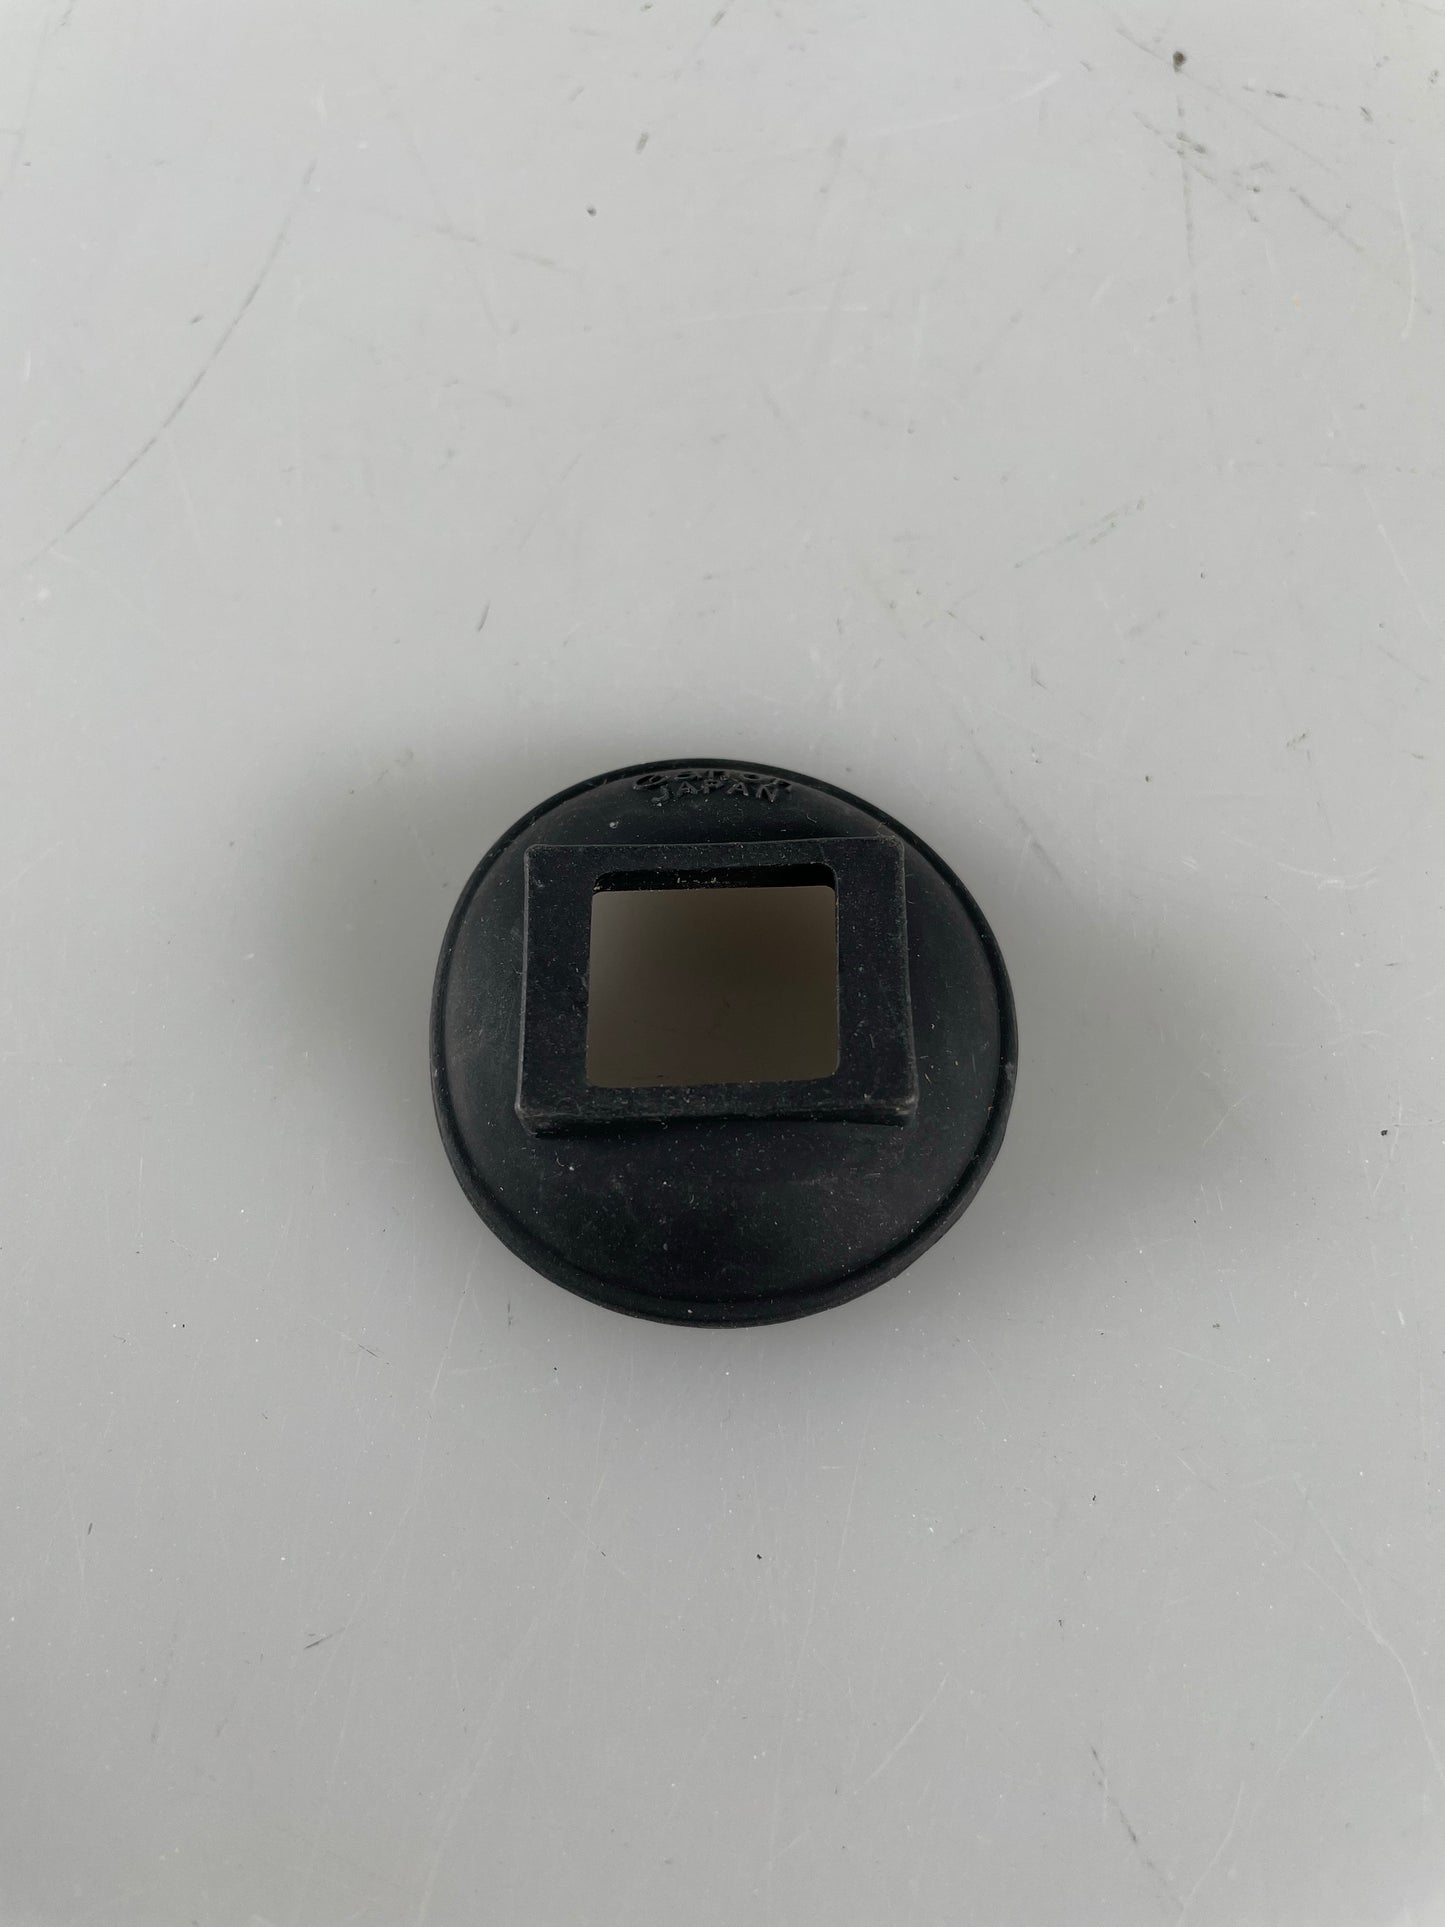 Canon Rubber Viewfinder Eyepiece for Canon AE-1, A-1 Finder Eyecup